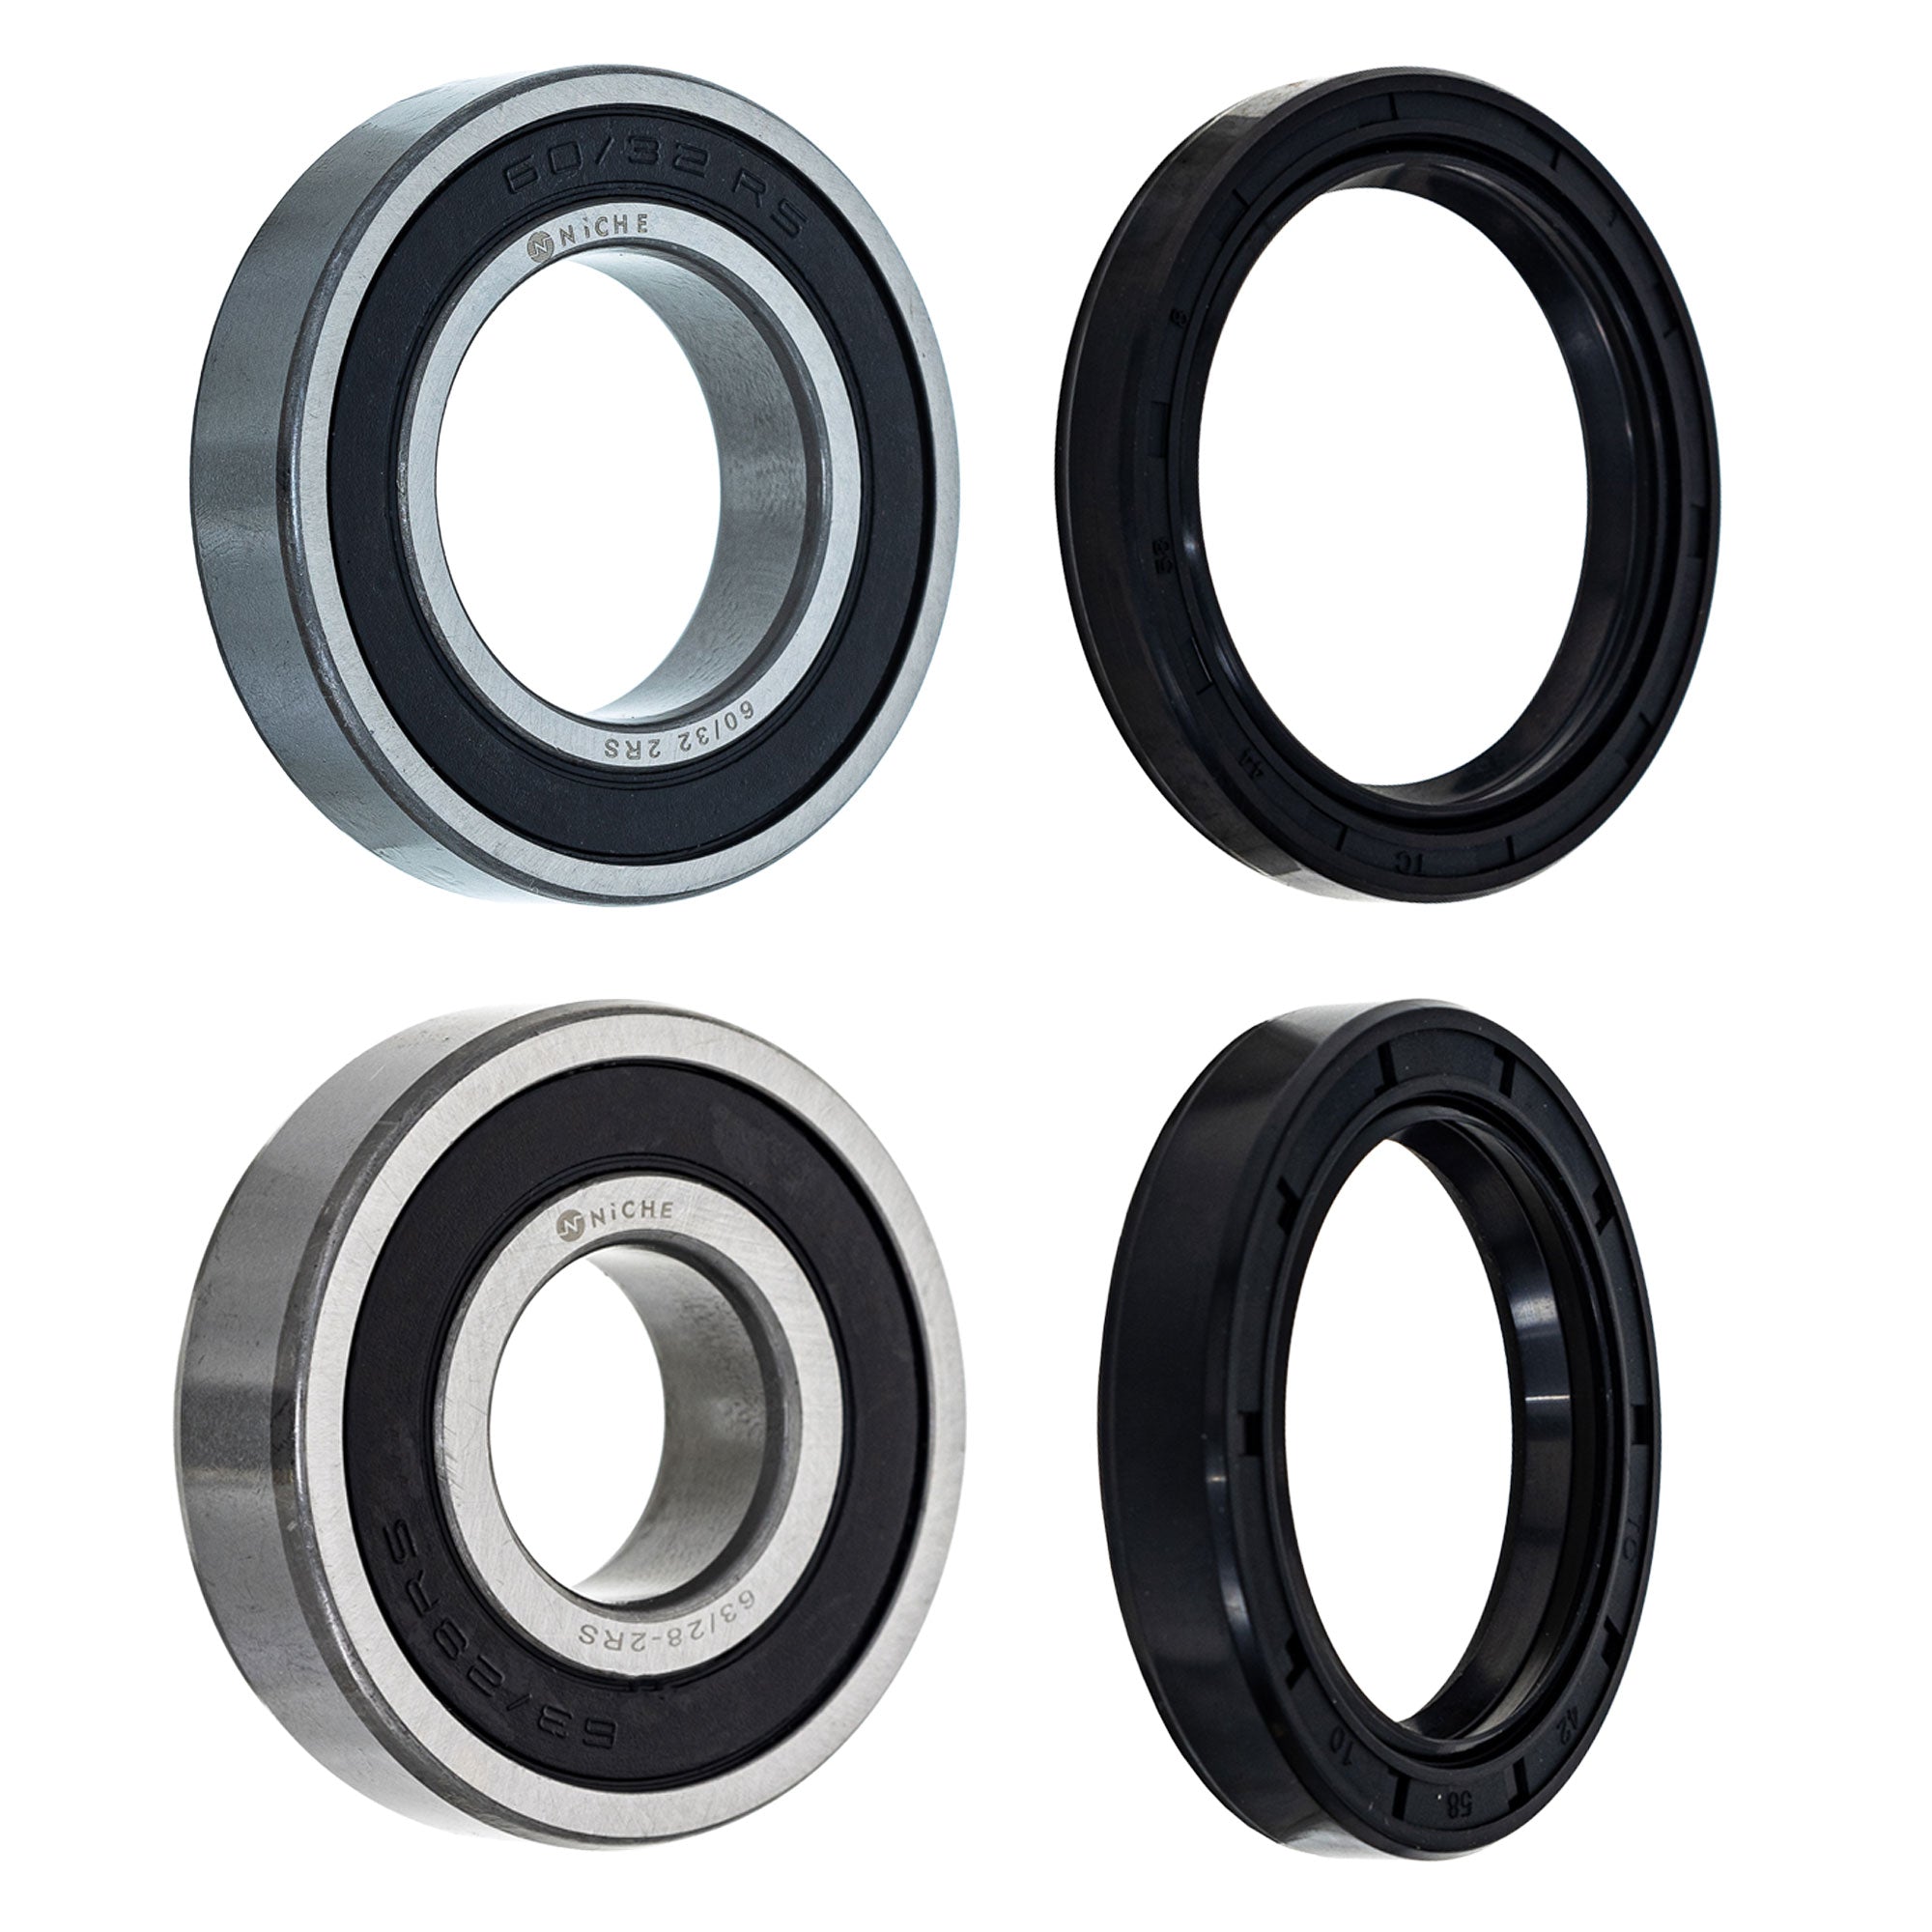 Wheel Bearing Seal Kit for zOTHER FourTrax NICHE MK1008925